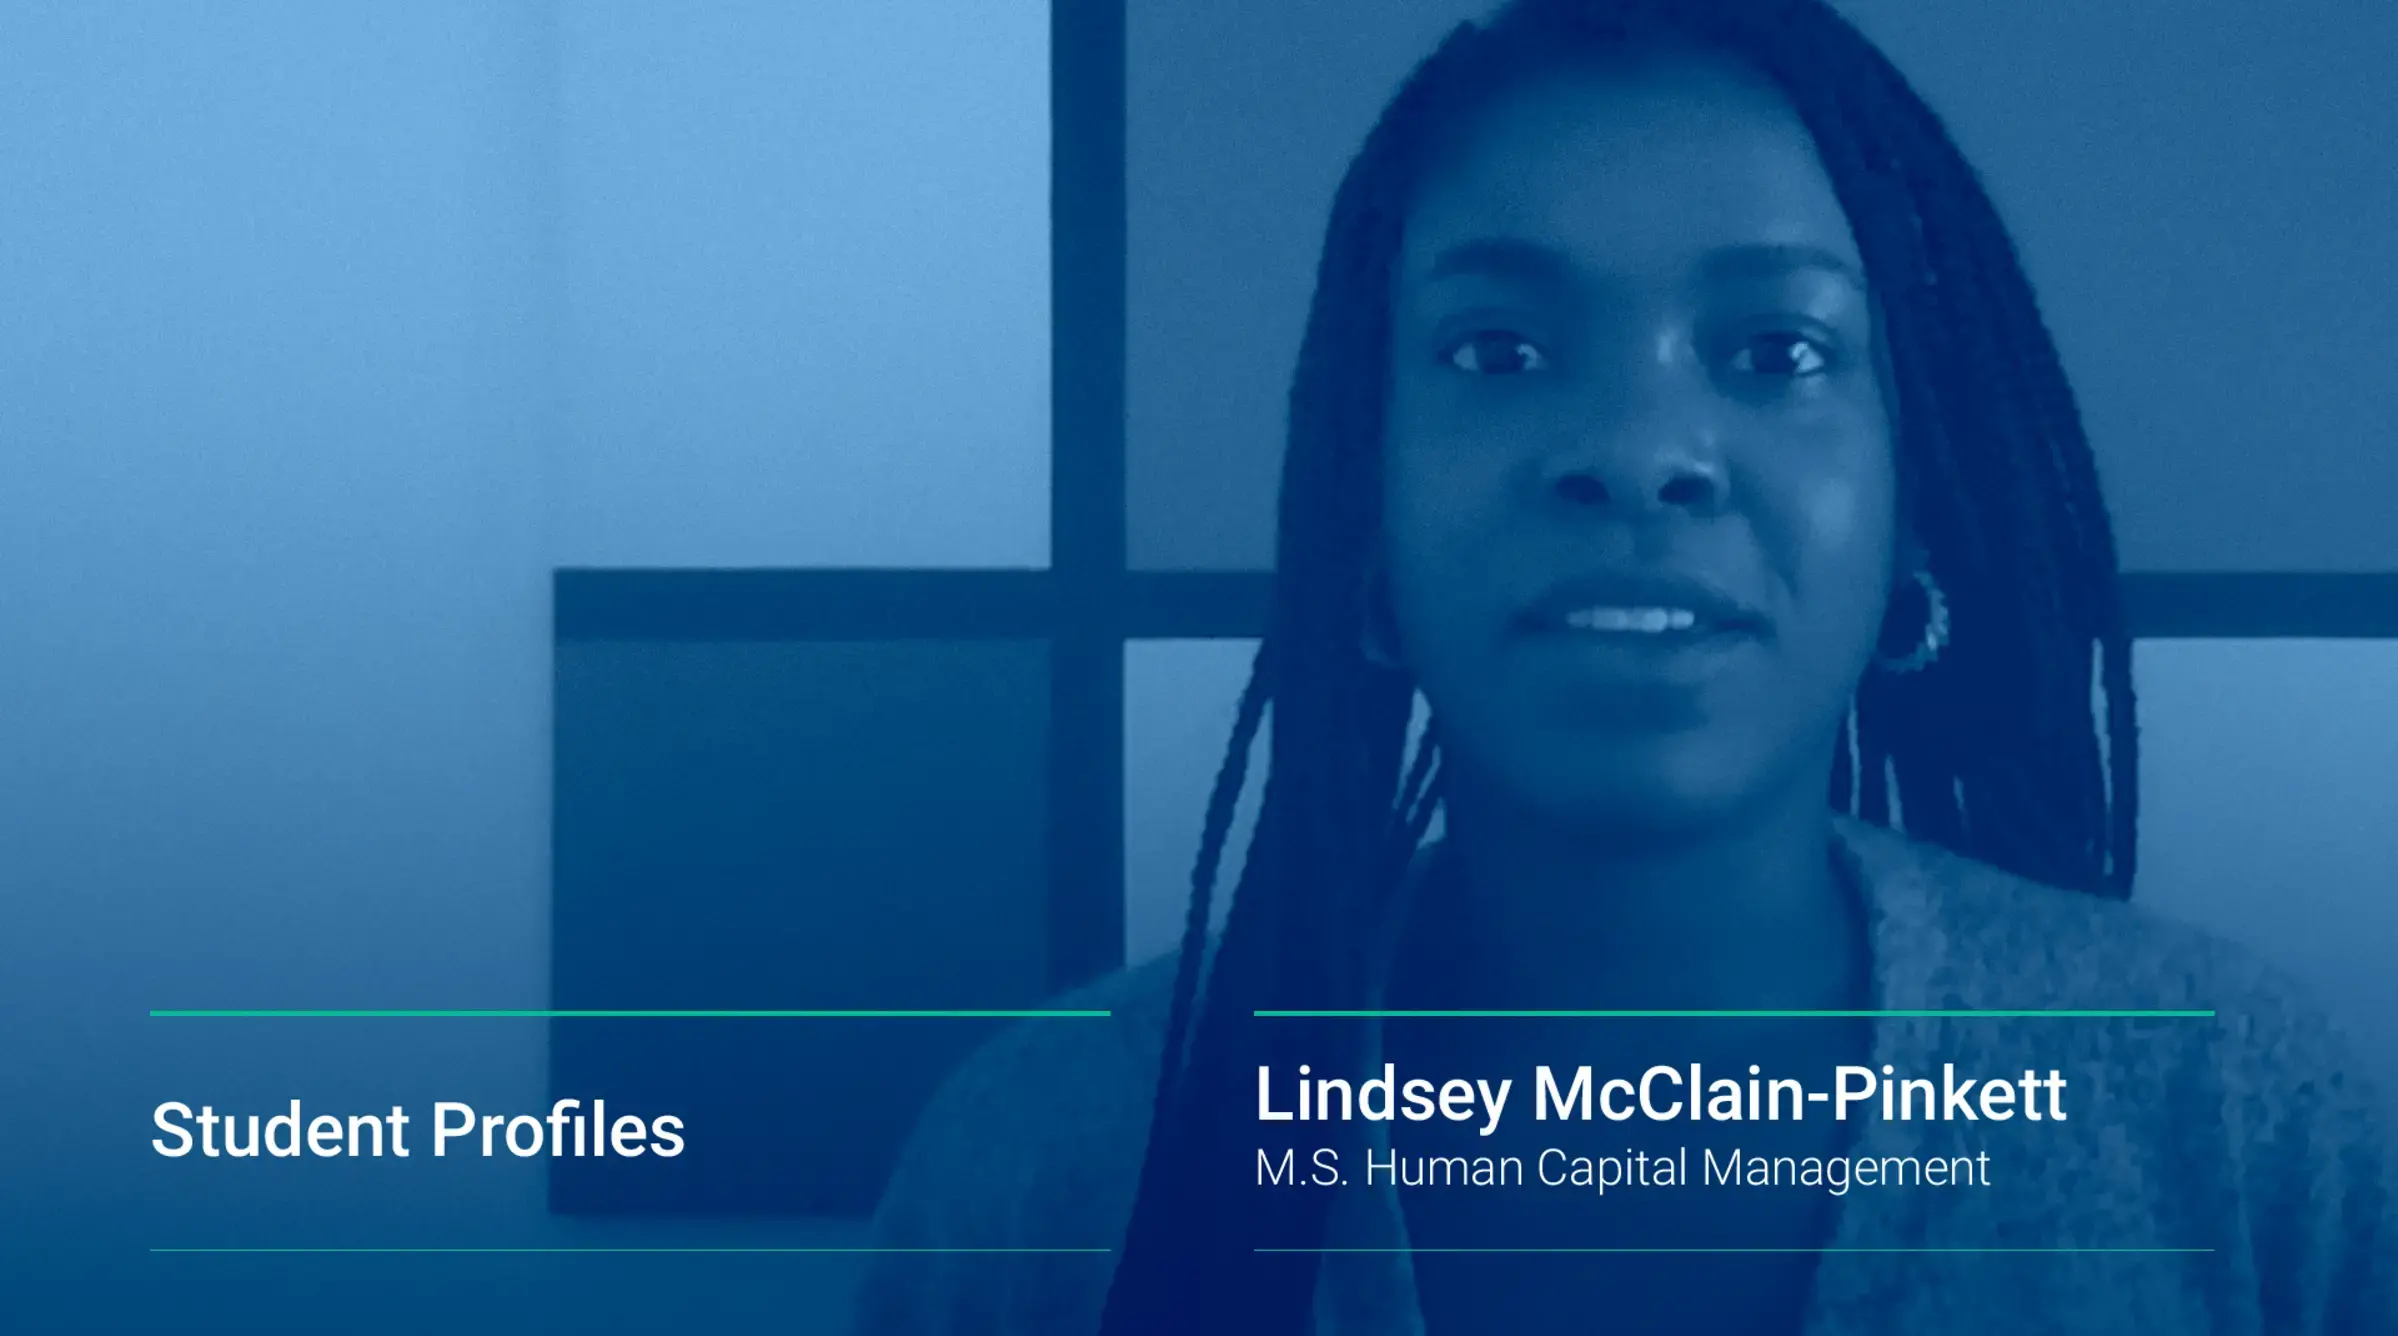 A still from Lindsey McClain-Pinkett's video interview about the Human Capital Management master's program.